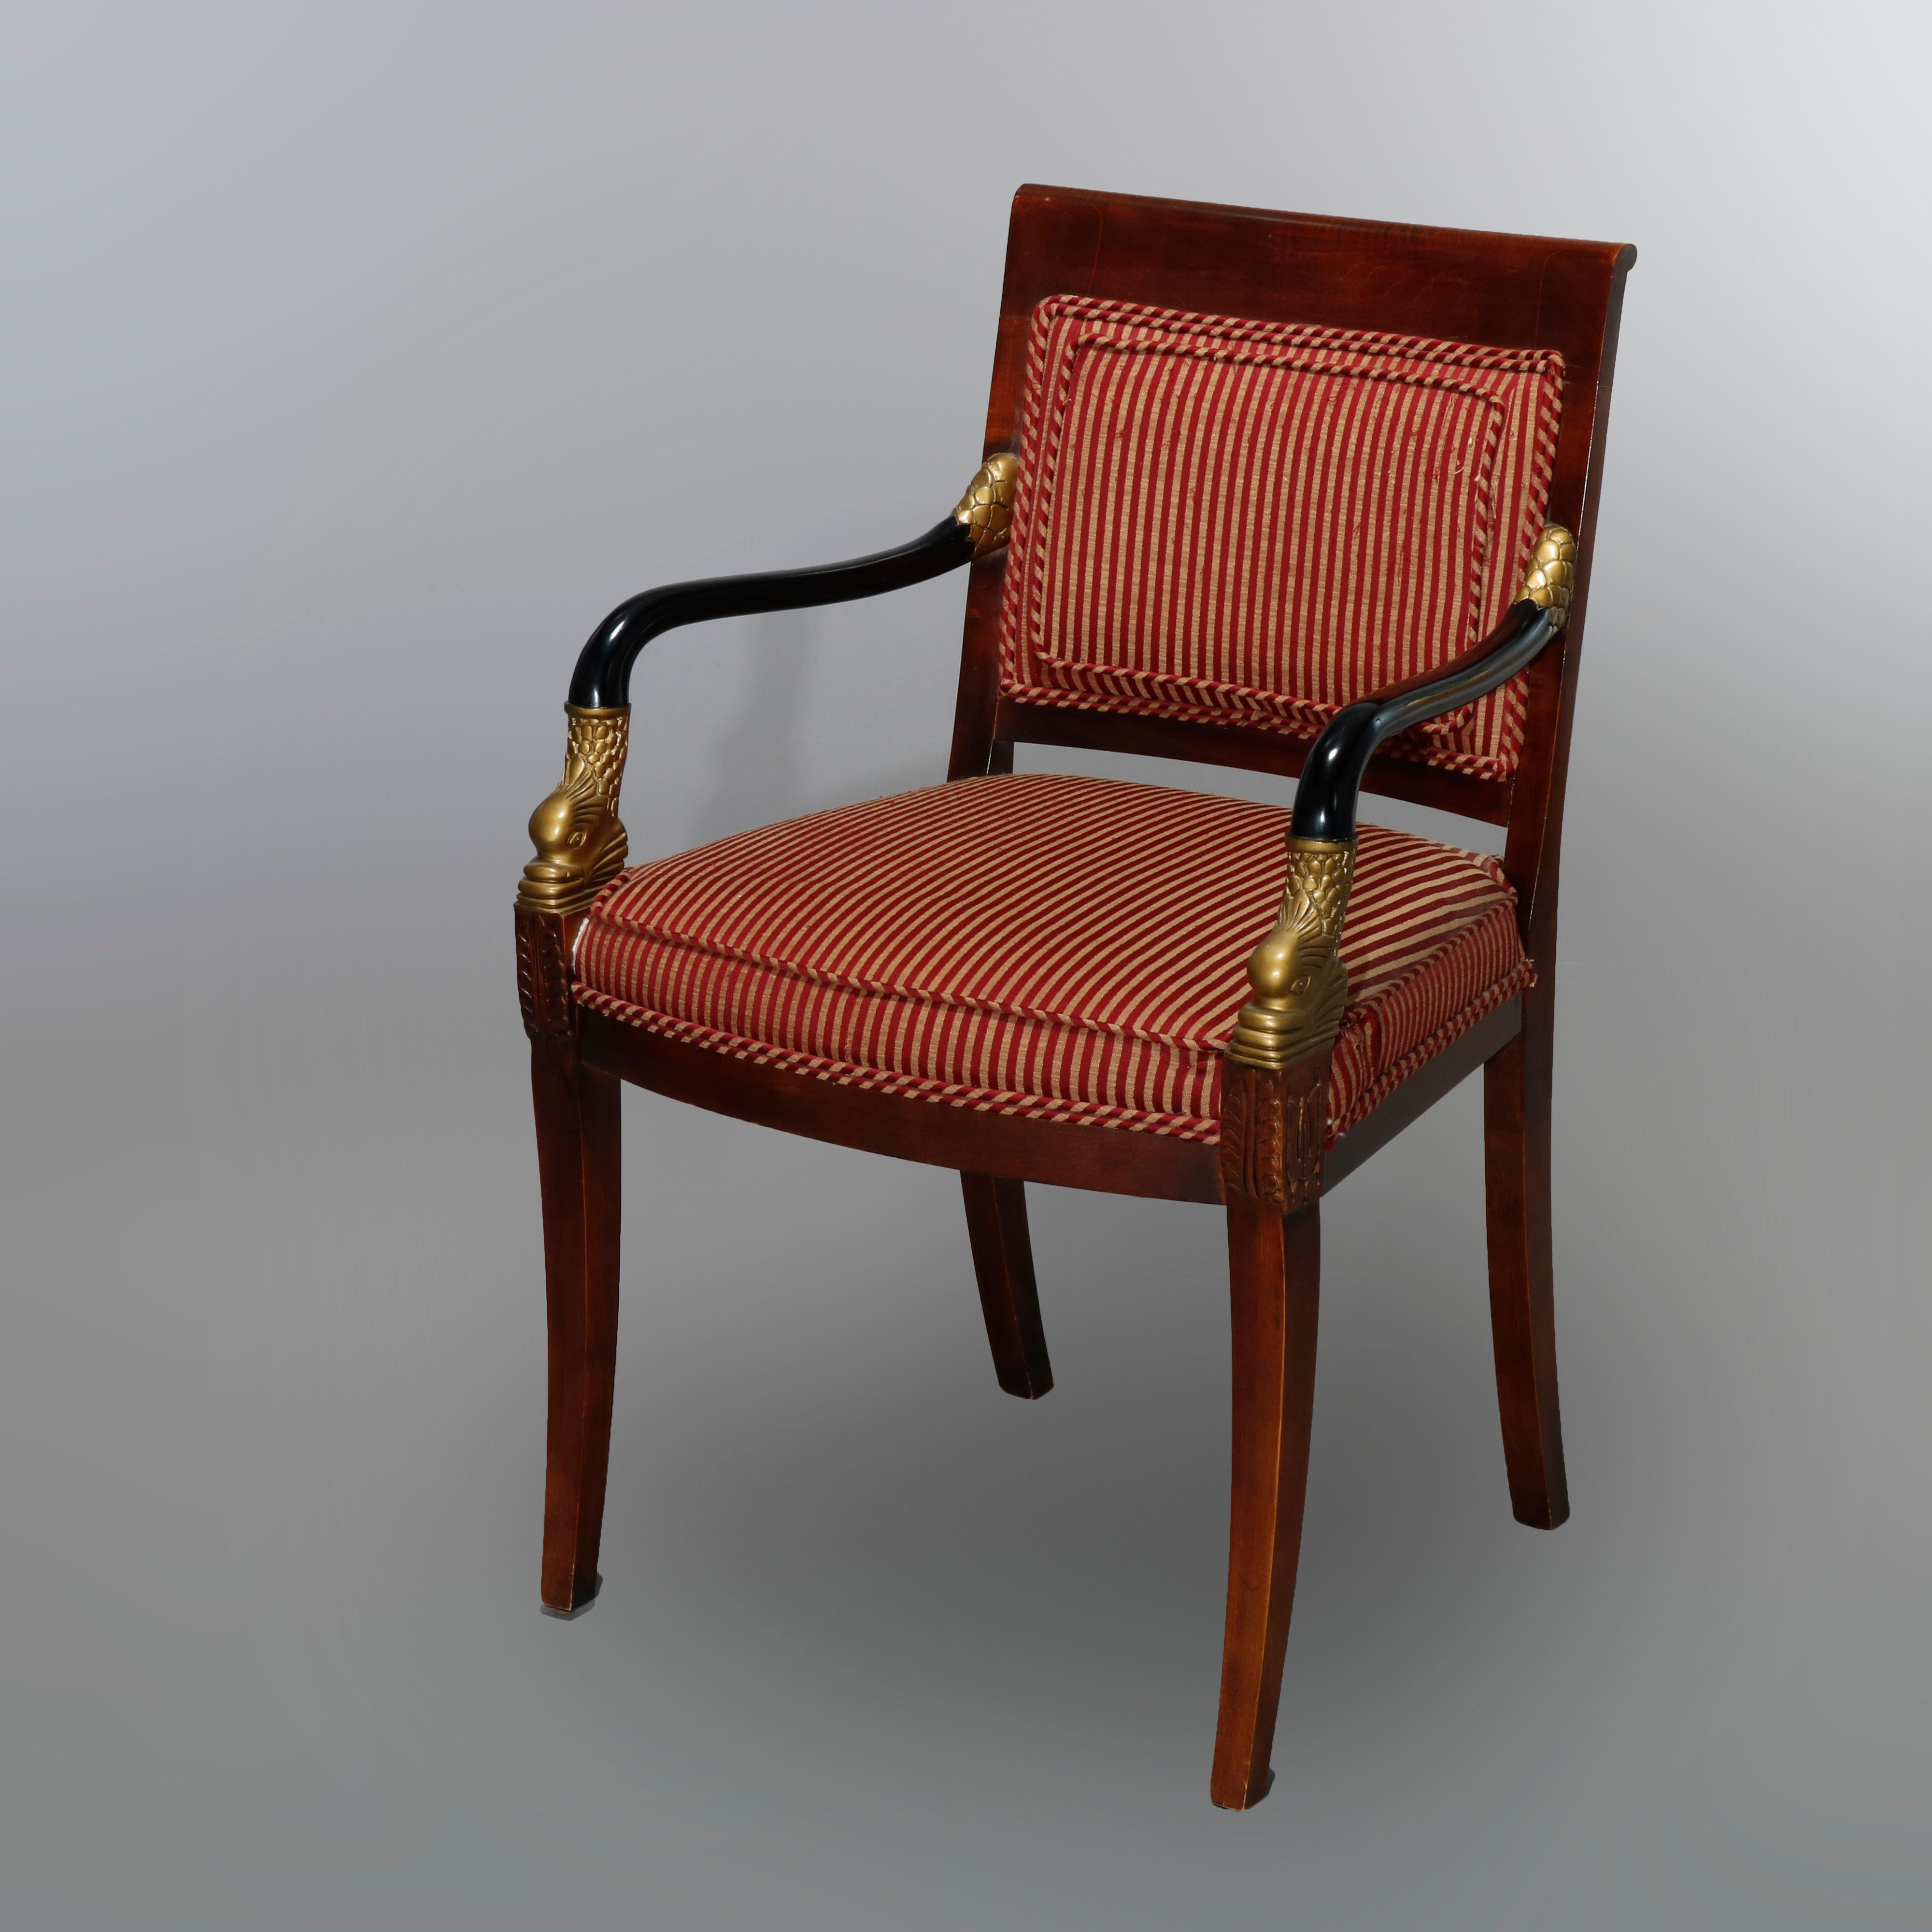 An antique pair of French Empire armchairs by Century Chair Co., Hickory, NC offer mahogany frames with ebonized arms having carved and gilt dolphins, backs and seats upholstered in striped fabric, maker label as photographed, 20th